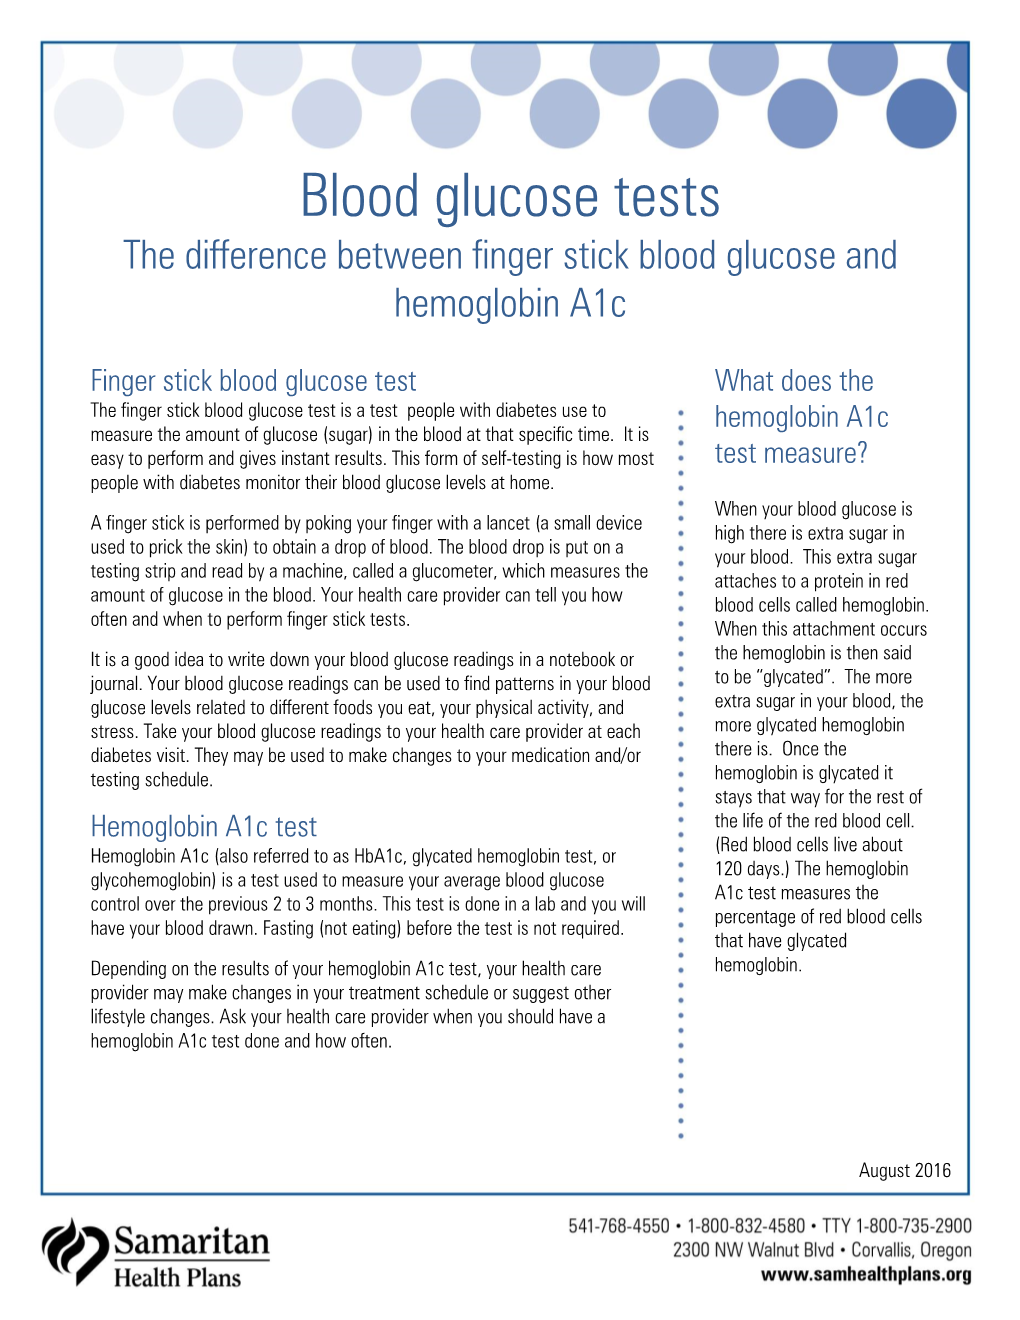 Blood Glucose Tests the Difference Between Finger Stick Blood Glucose and Hemoglobin A1c